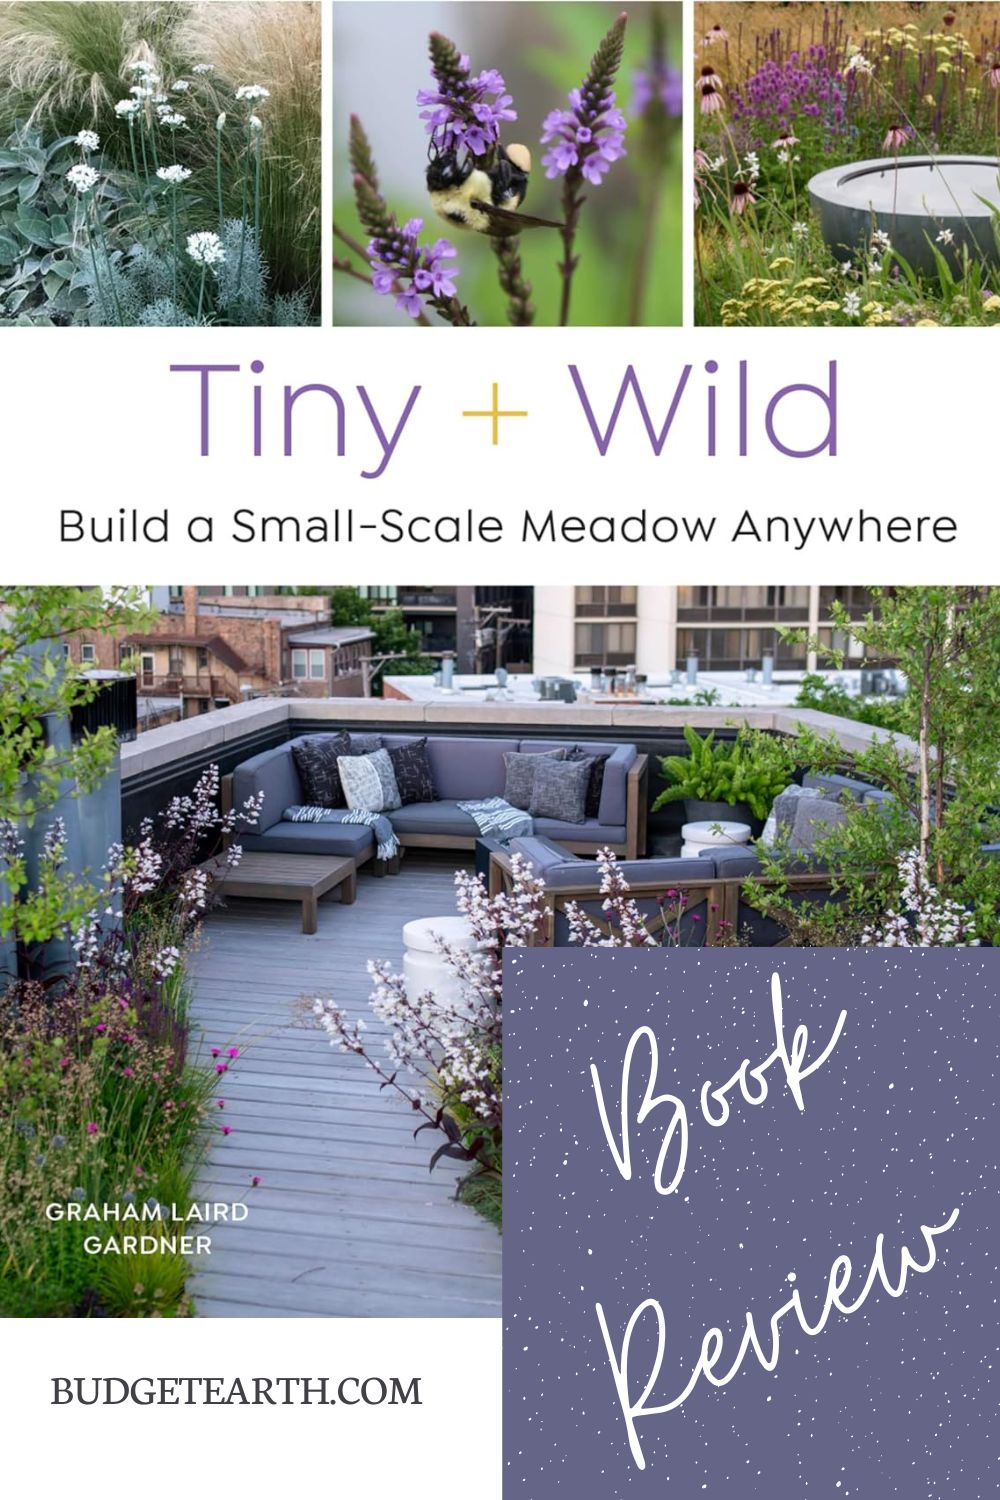 review of tiny + Wild